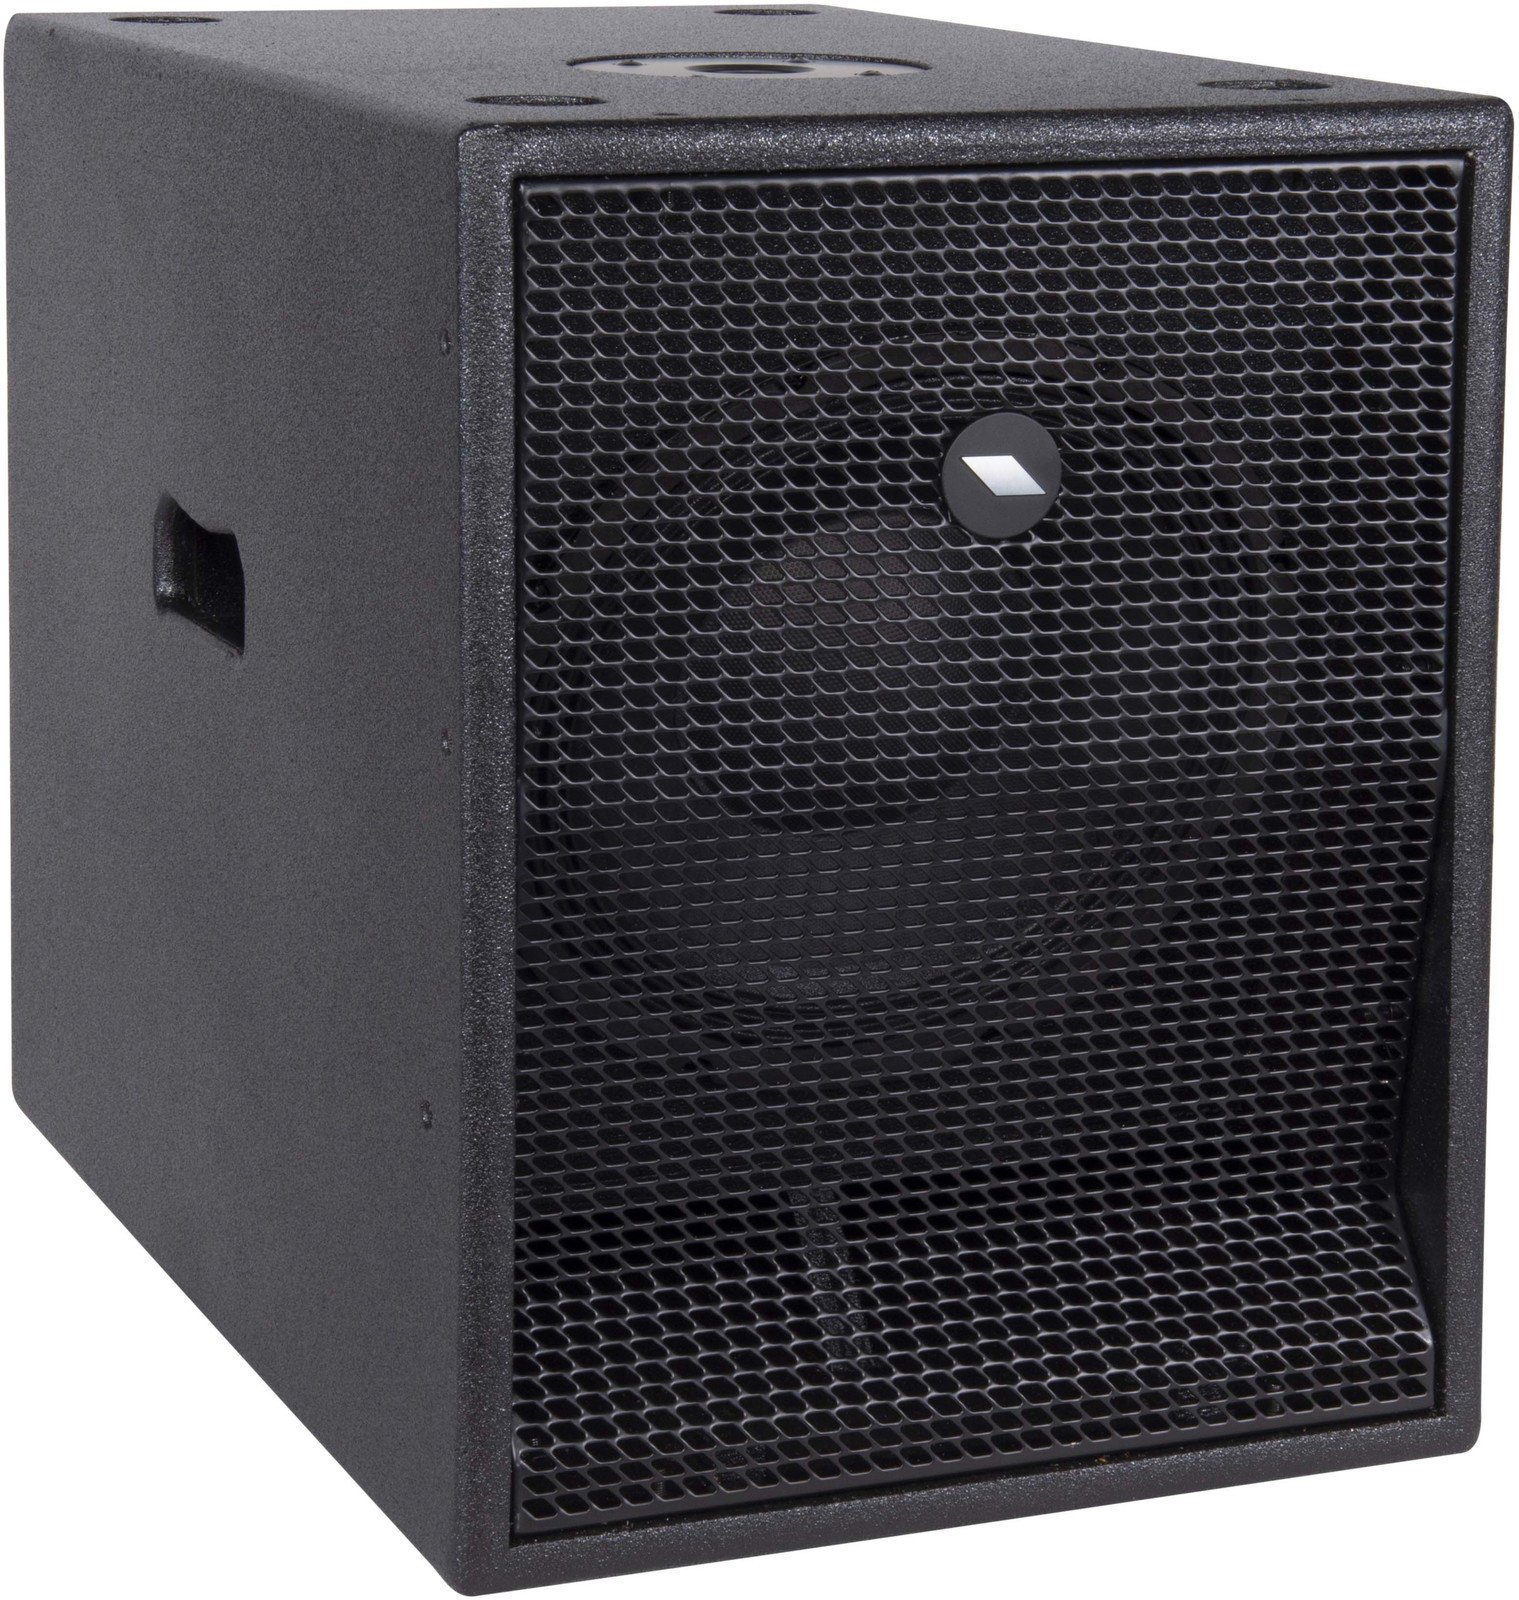 Active Subwoofer PROEL S10A Active Subwoofer (Pre-owned)